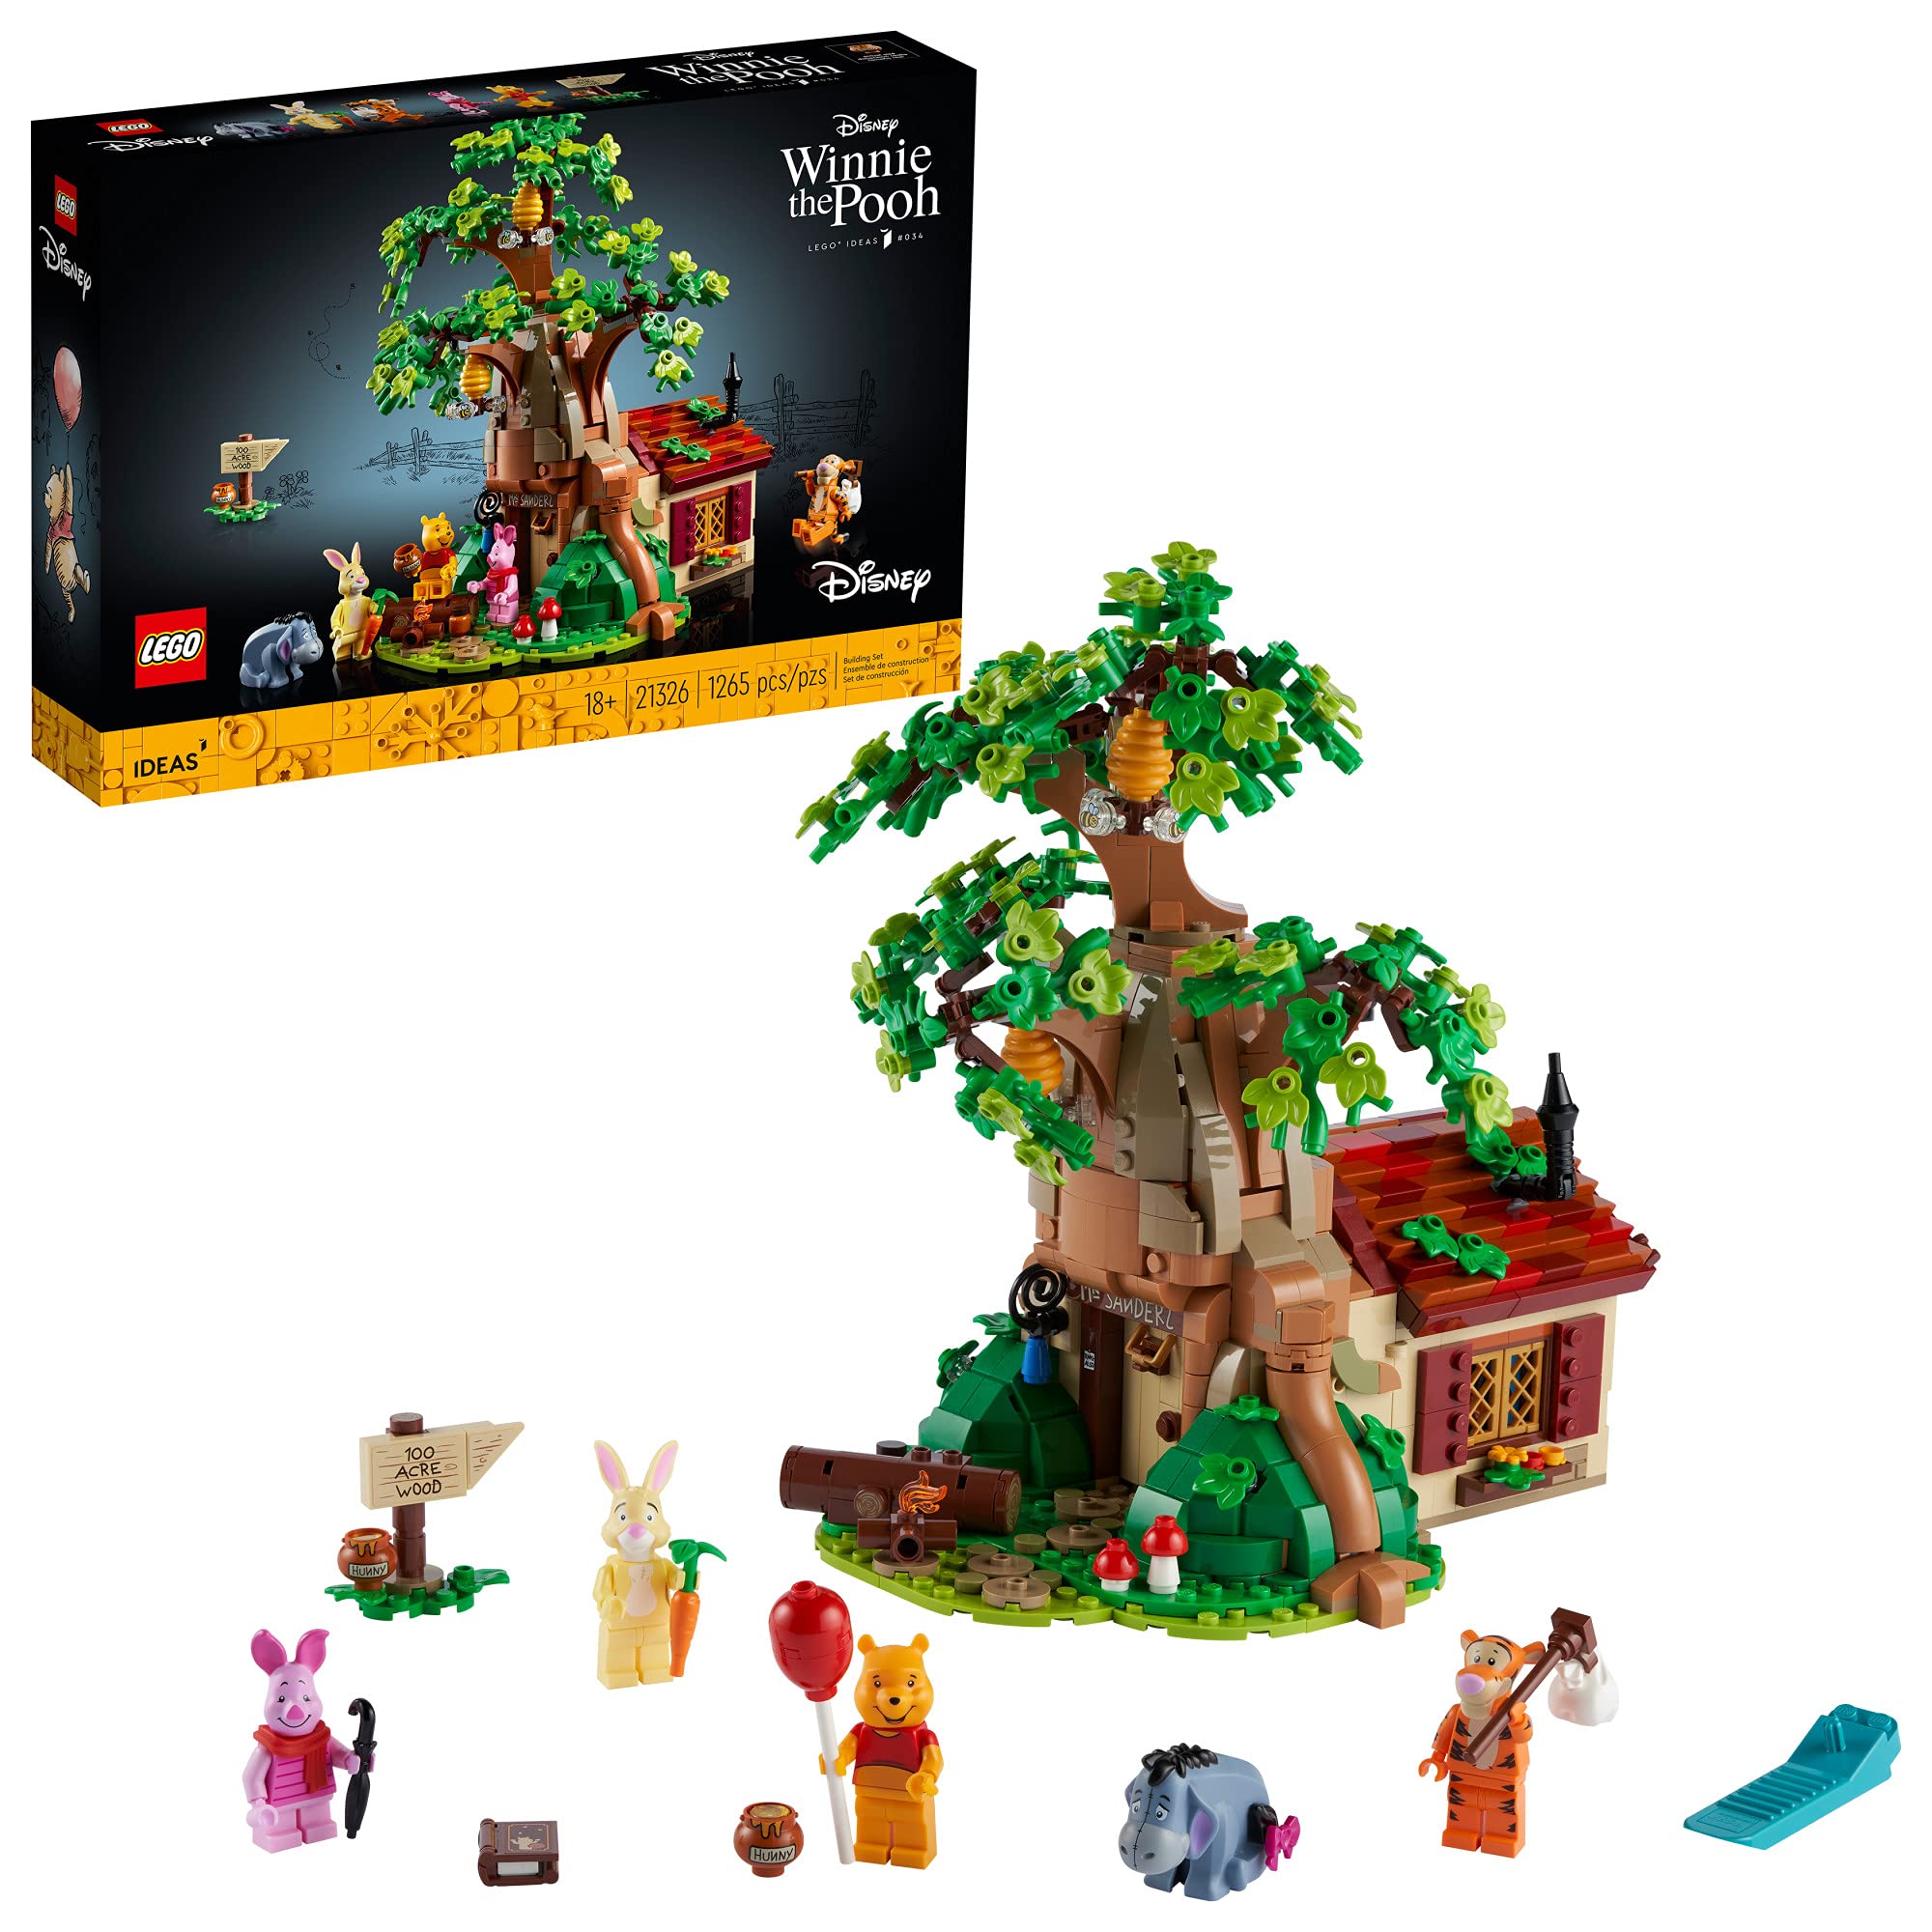 LEGO Ideas Disney Winnie The Pooh 21326 Building Set for Adults, Home Décor Display Model Collectible Gift with Piglet Minifigure and Eeyore Figure